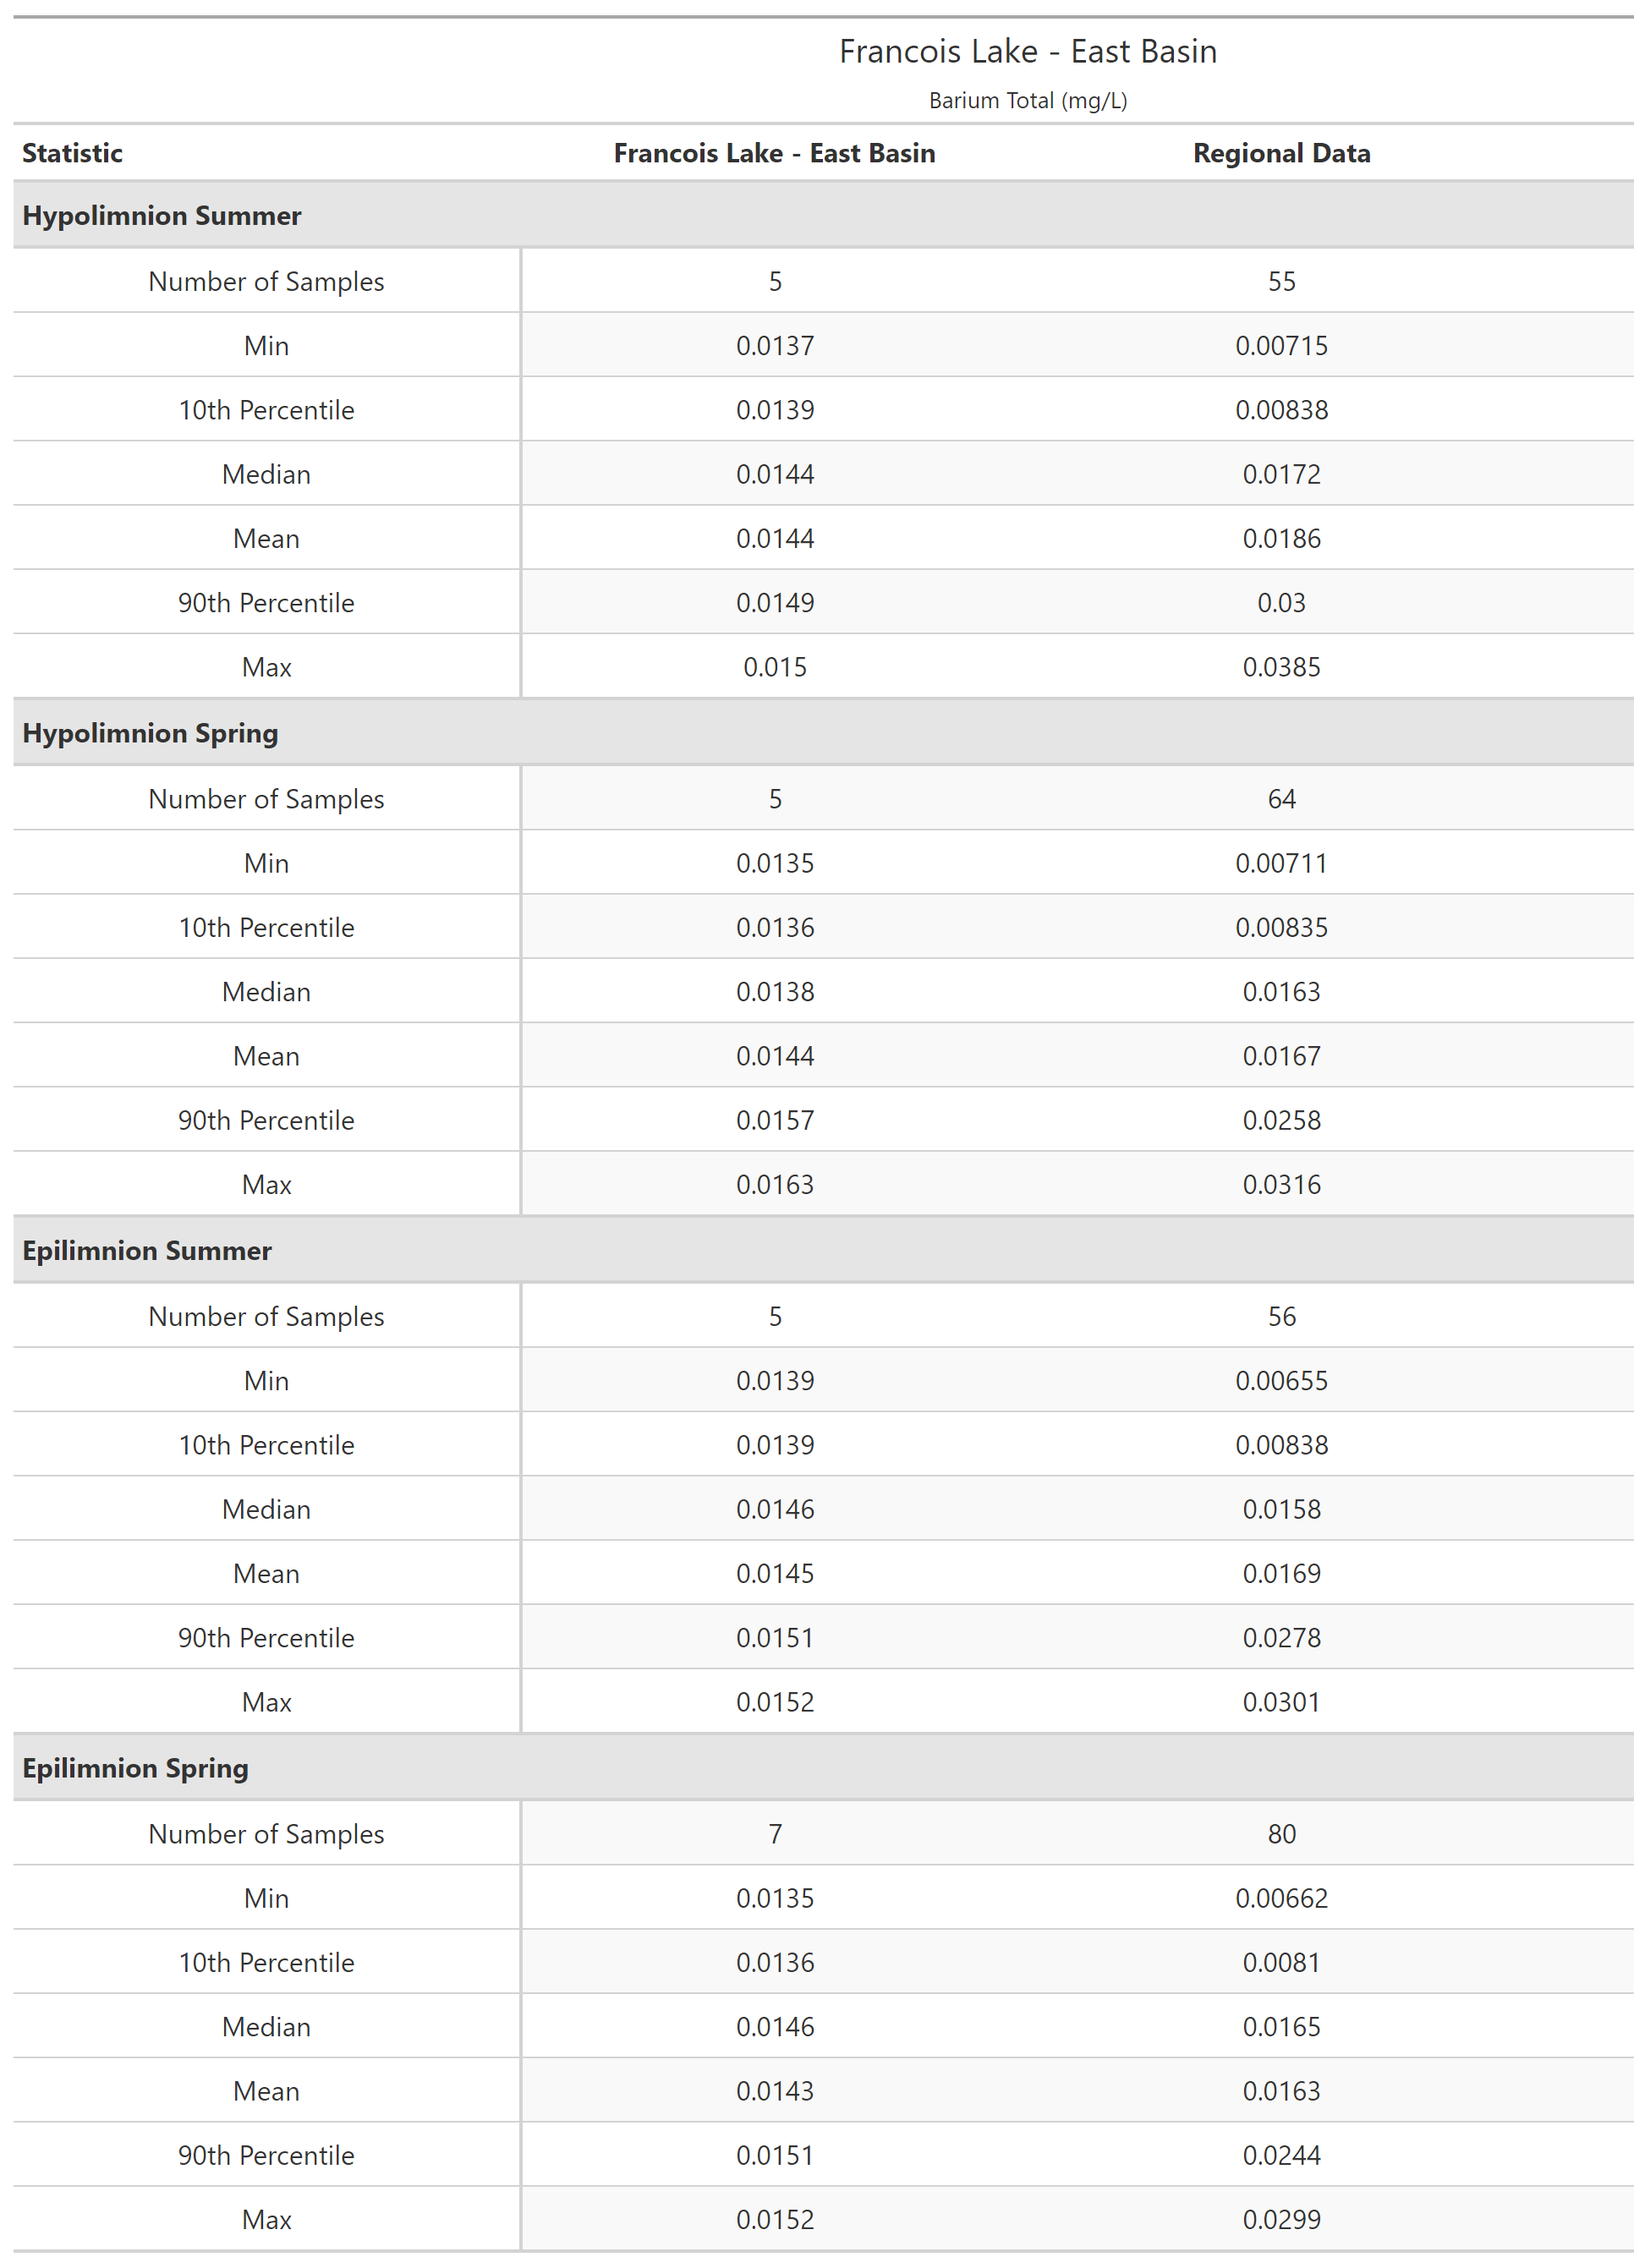 A table of summary statistics for Barium Total with comparison to regional data